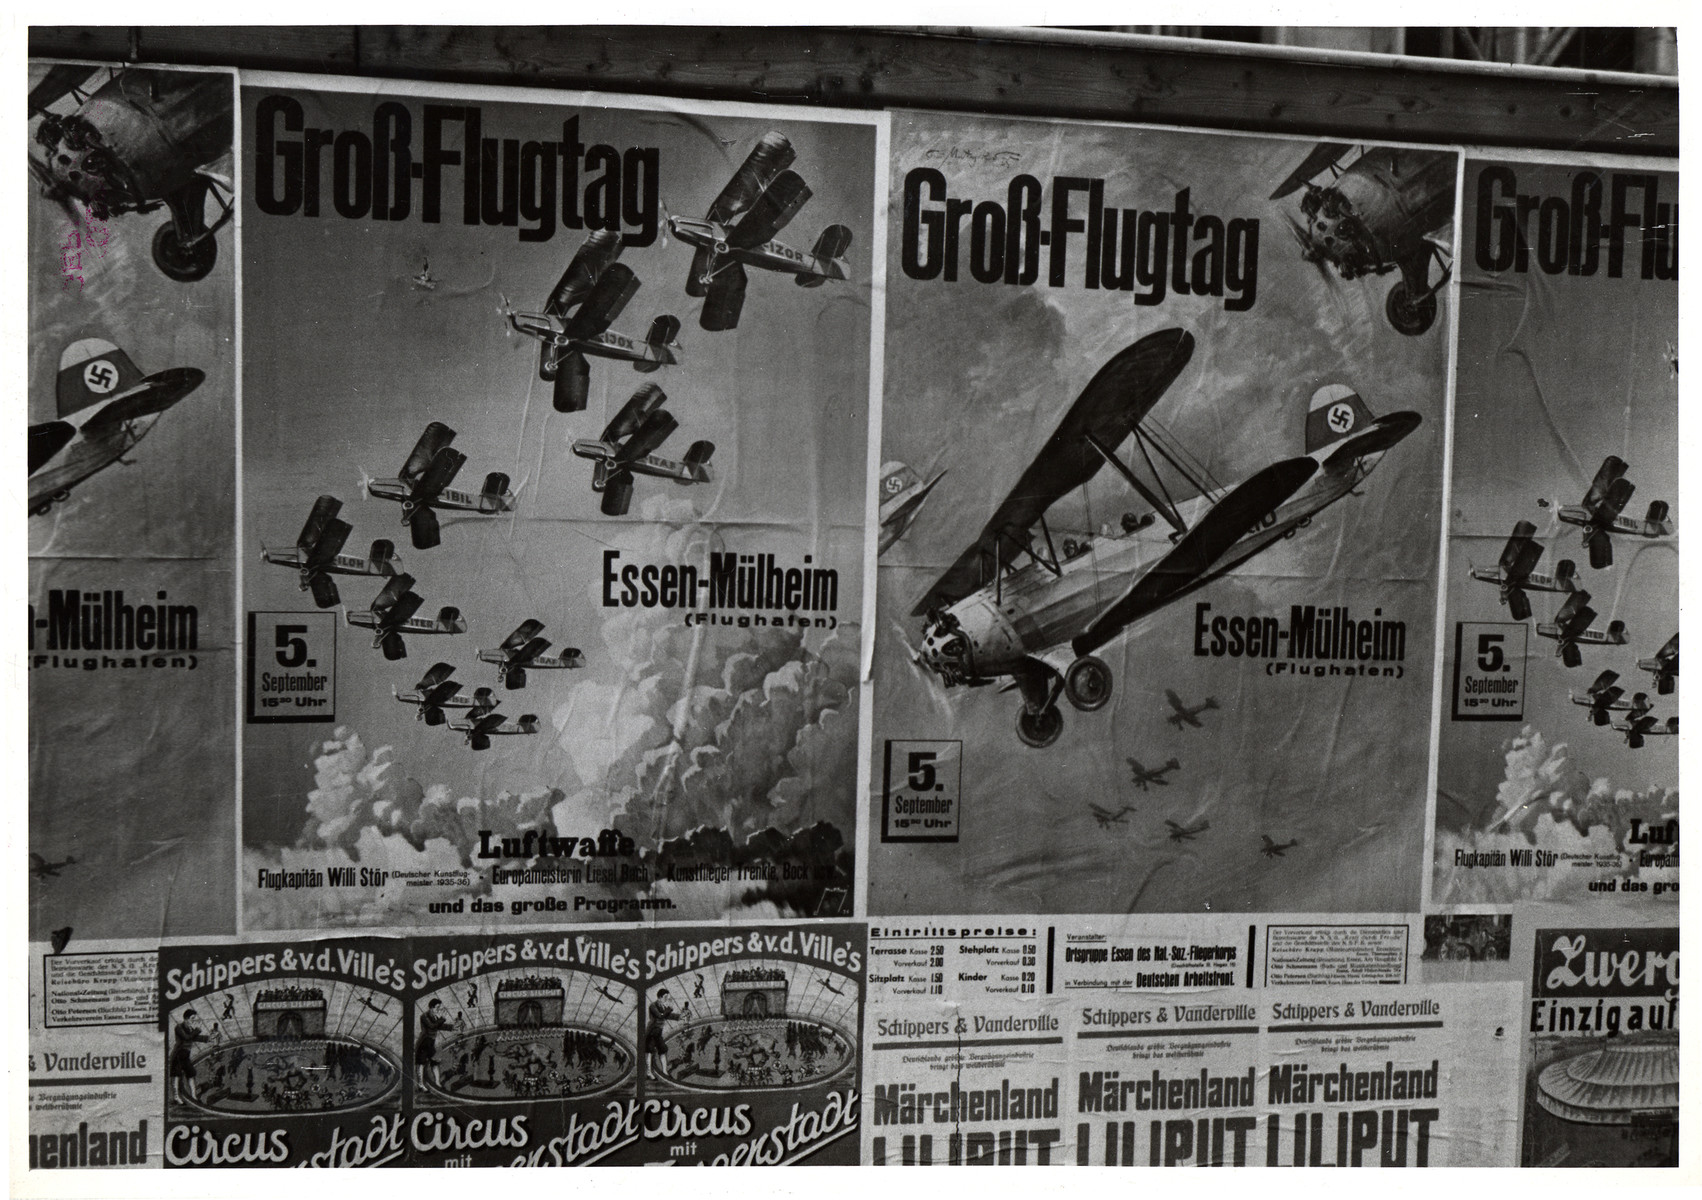 View of a bulletin board with posters advertising a major Luftwaffe air show.